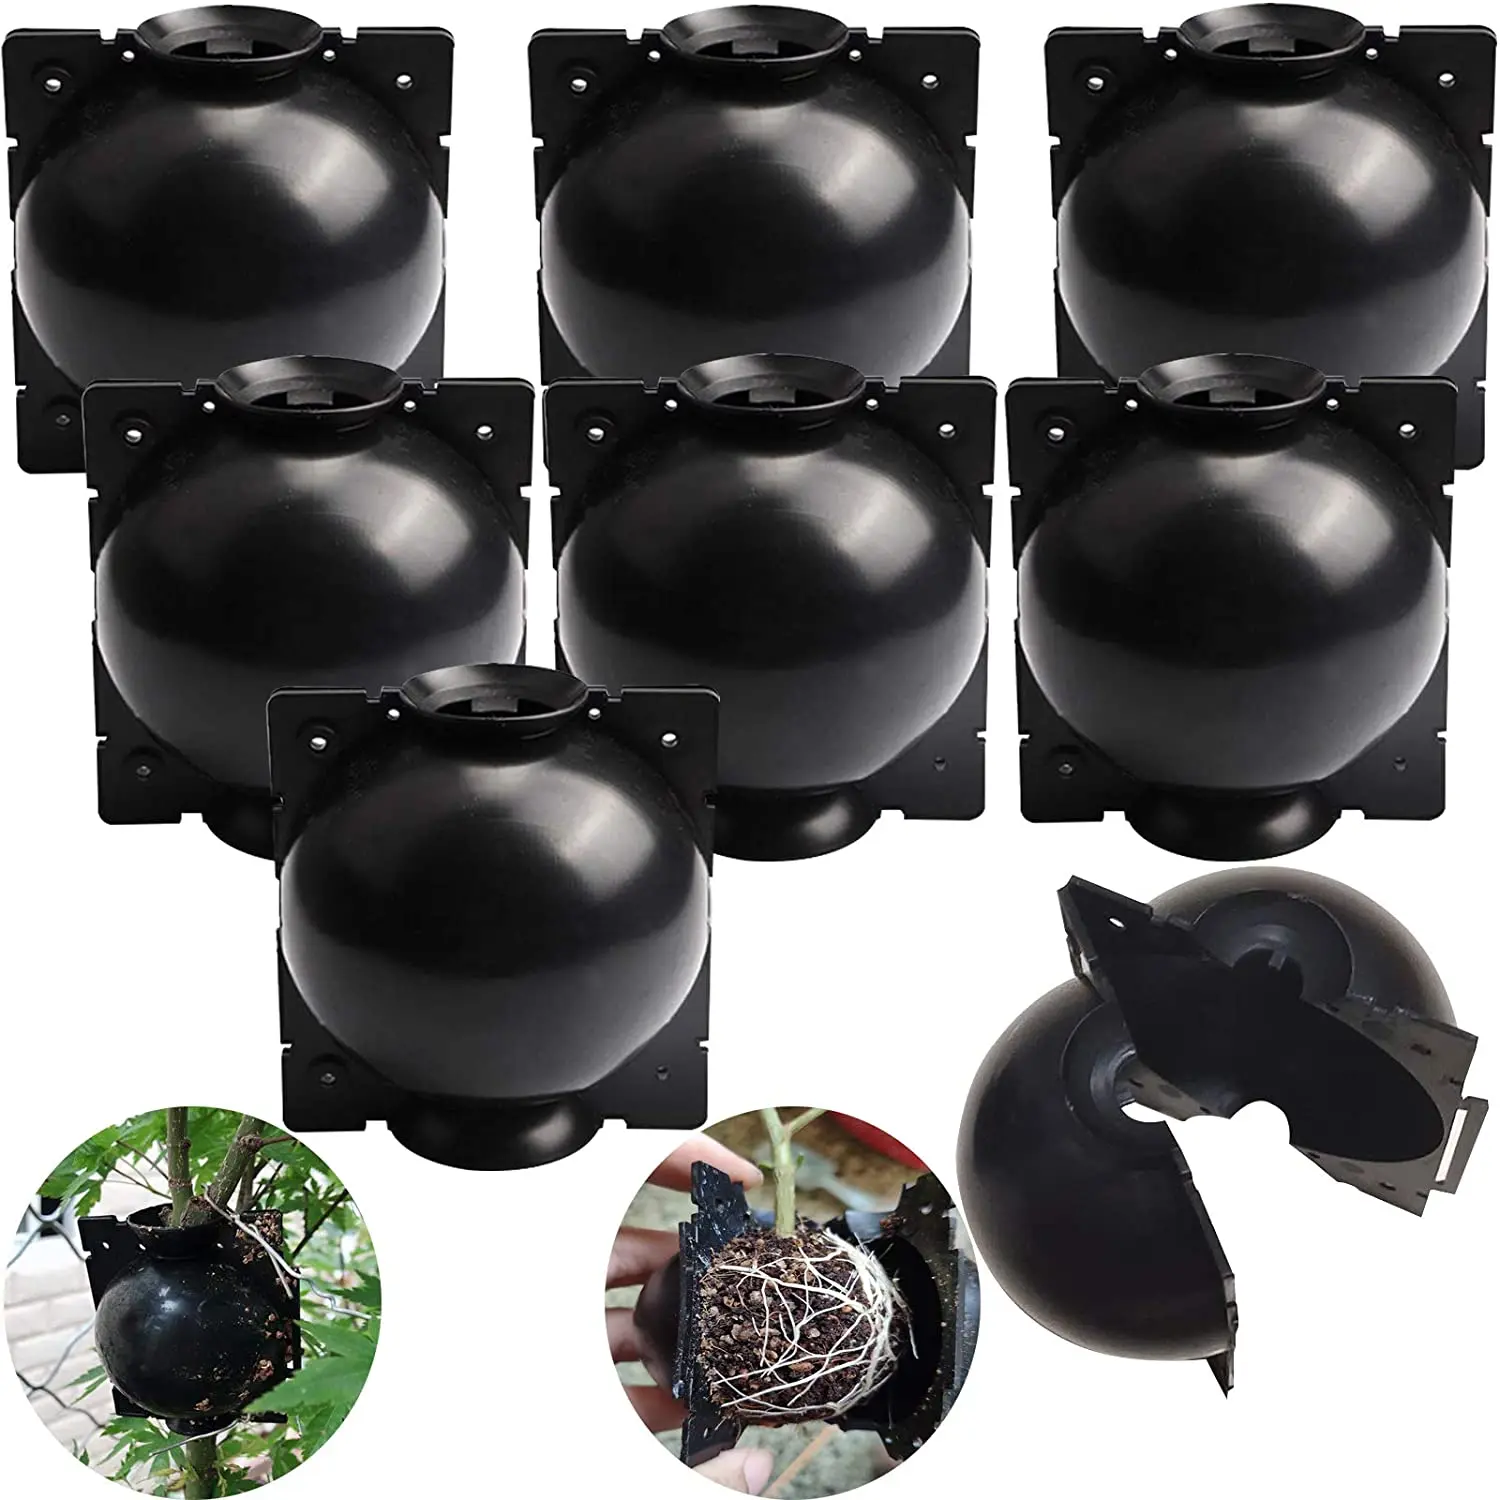 Details about   5 PCS Plant Rooting Device Propagation Ball High Pressure Box Growing Grafting-S 